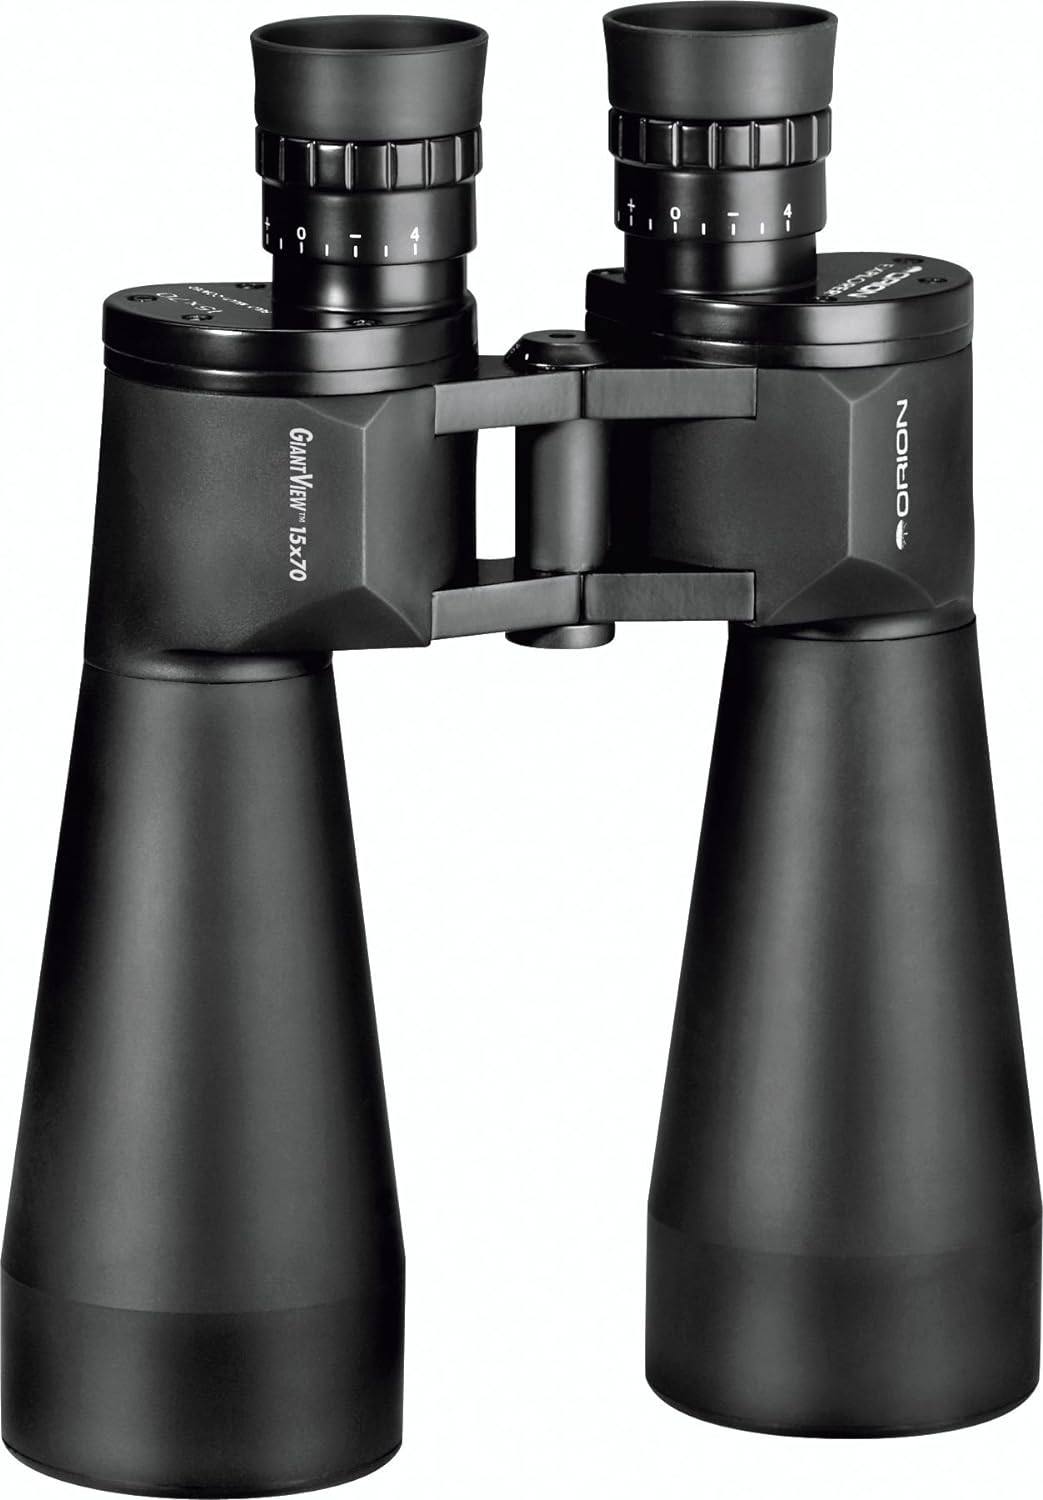 Orion GiantView 15x70 WP Astronomy Binoculars - Portable Yet Powerful Binoculars for Intermediate Astronomers and Long-Distance Terrestrial Observing